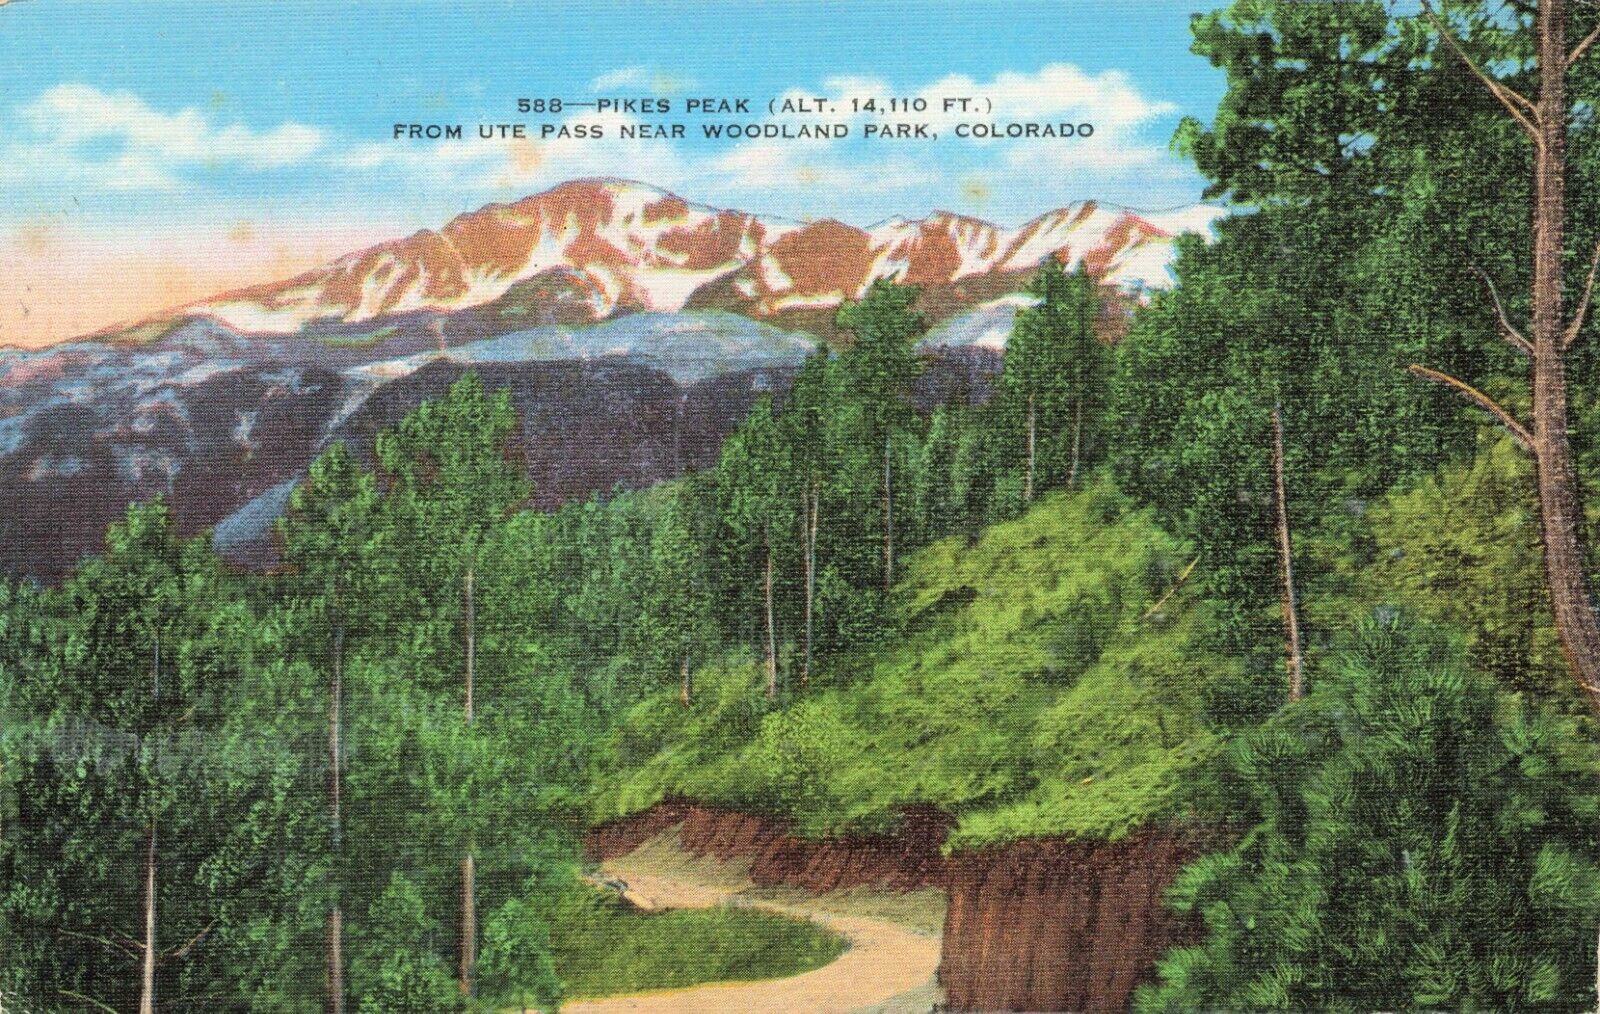 Postcard Pikes Peak from Ute Pass Near Woodland Park, Colorado Posted July 1940?